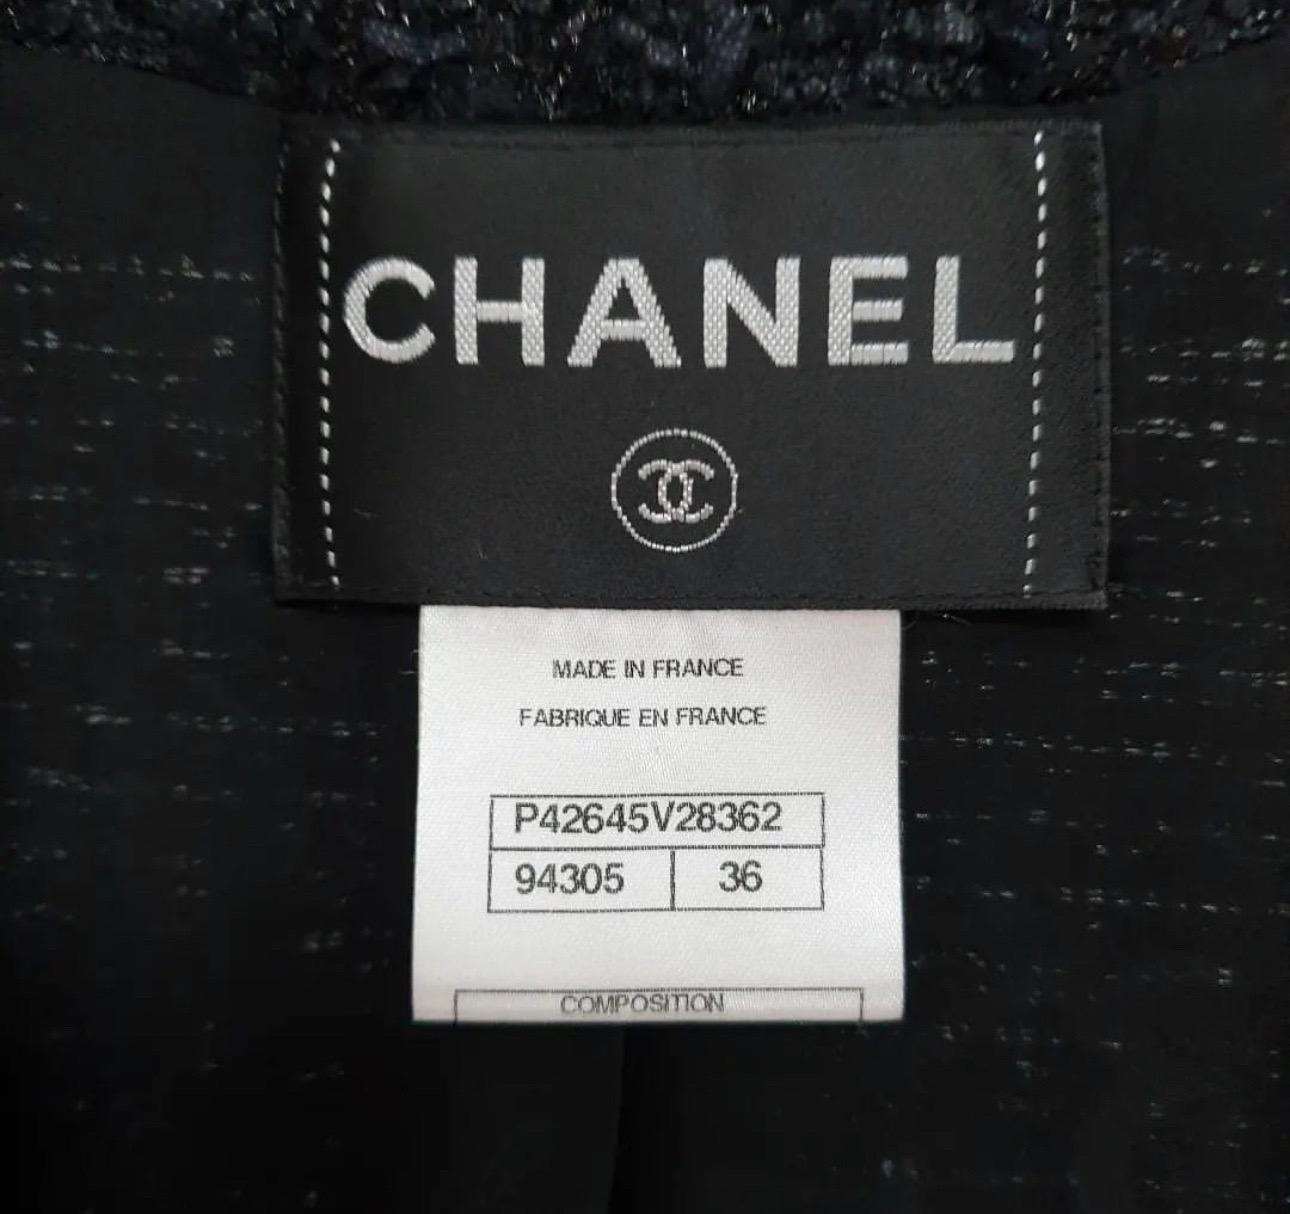 CHANEL cotton blend jacket in shades of blue / black / silver, double slider zipper. 

Sz. 36 
Condition is very good.

Hanger is not included.